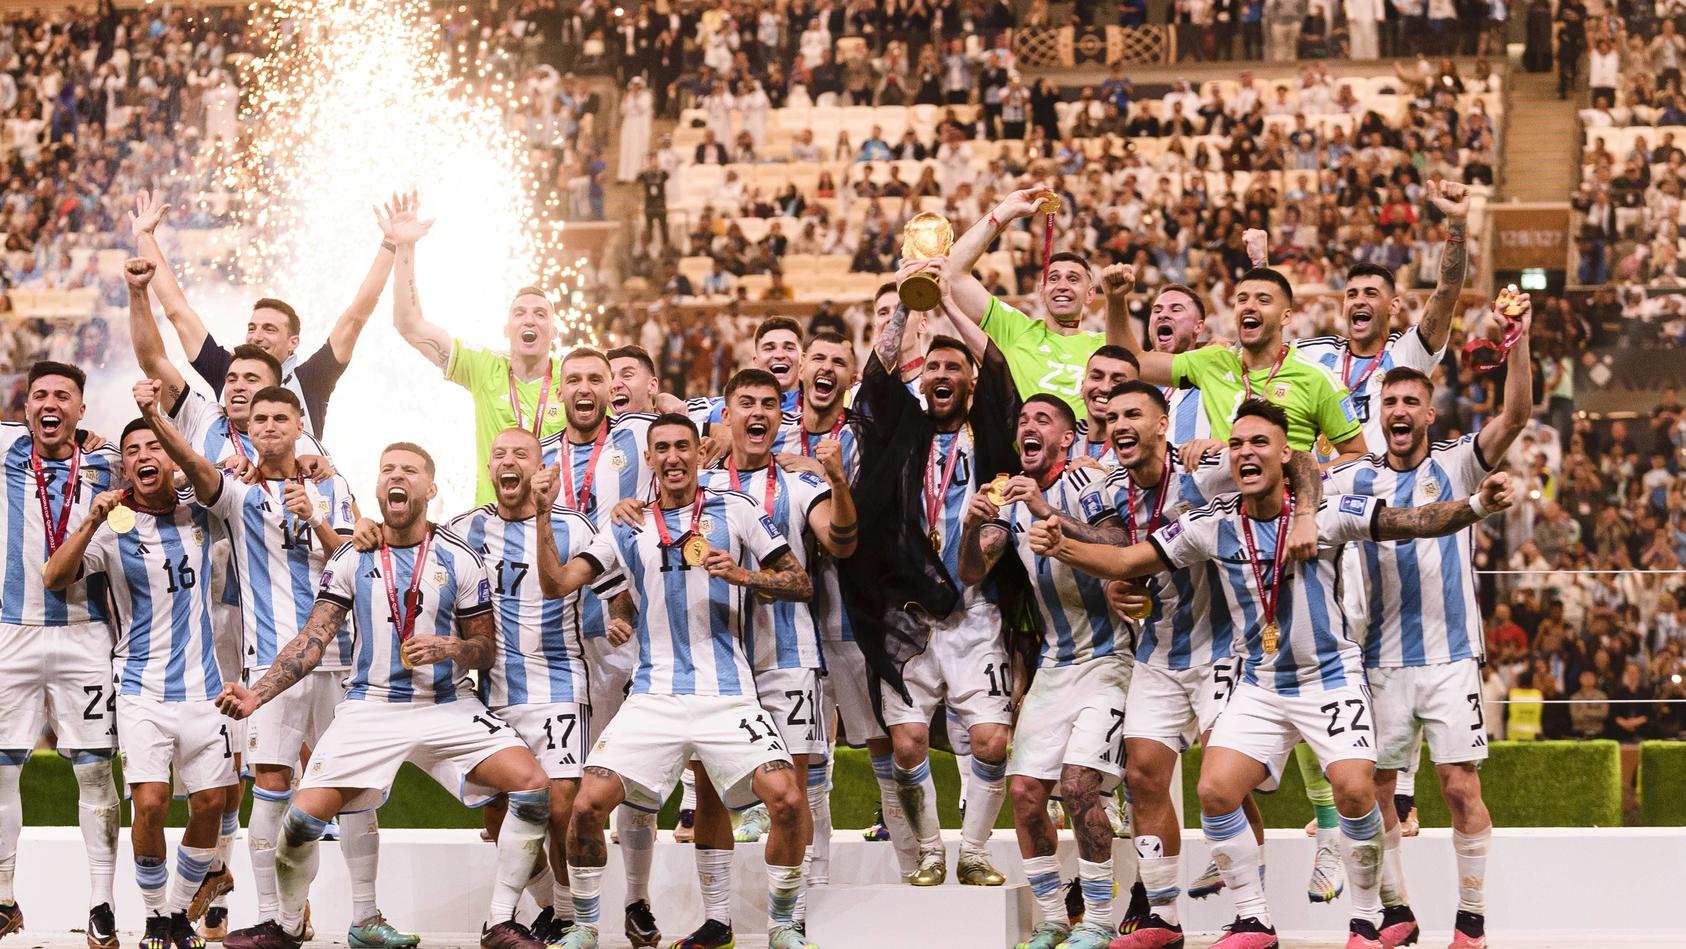  RECORD DATE NOT STATED  FIFA World Cup, WM, Weltmeisterschaft, Fussball Qatar 2022 Argentina vs France Final Lionel Messi lifts the Champions Trophy with players from Argentina the game Argentina vs France, corresponding to the great final of the FI